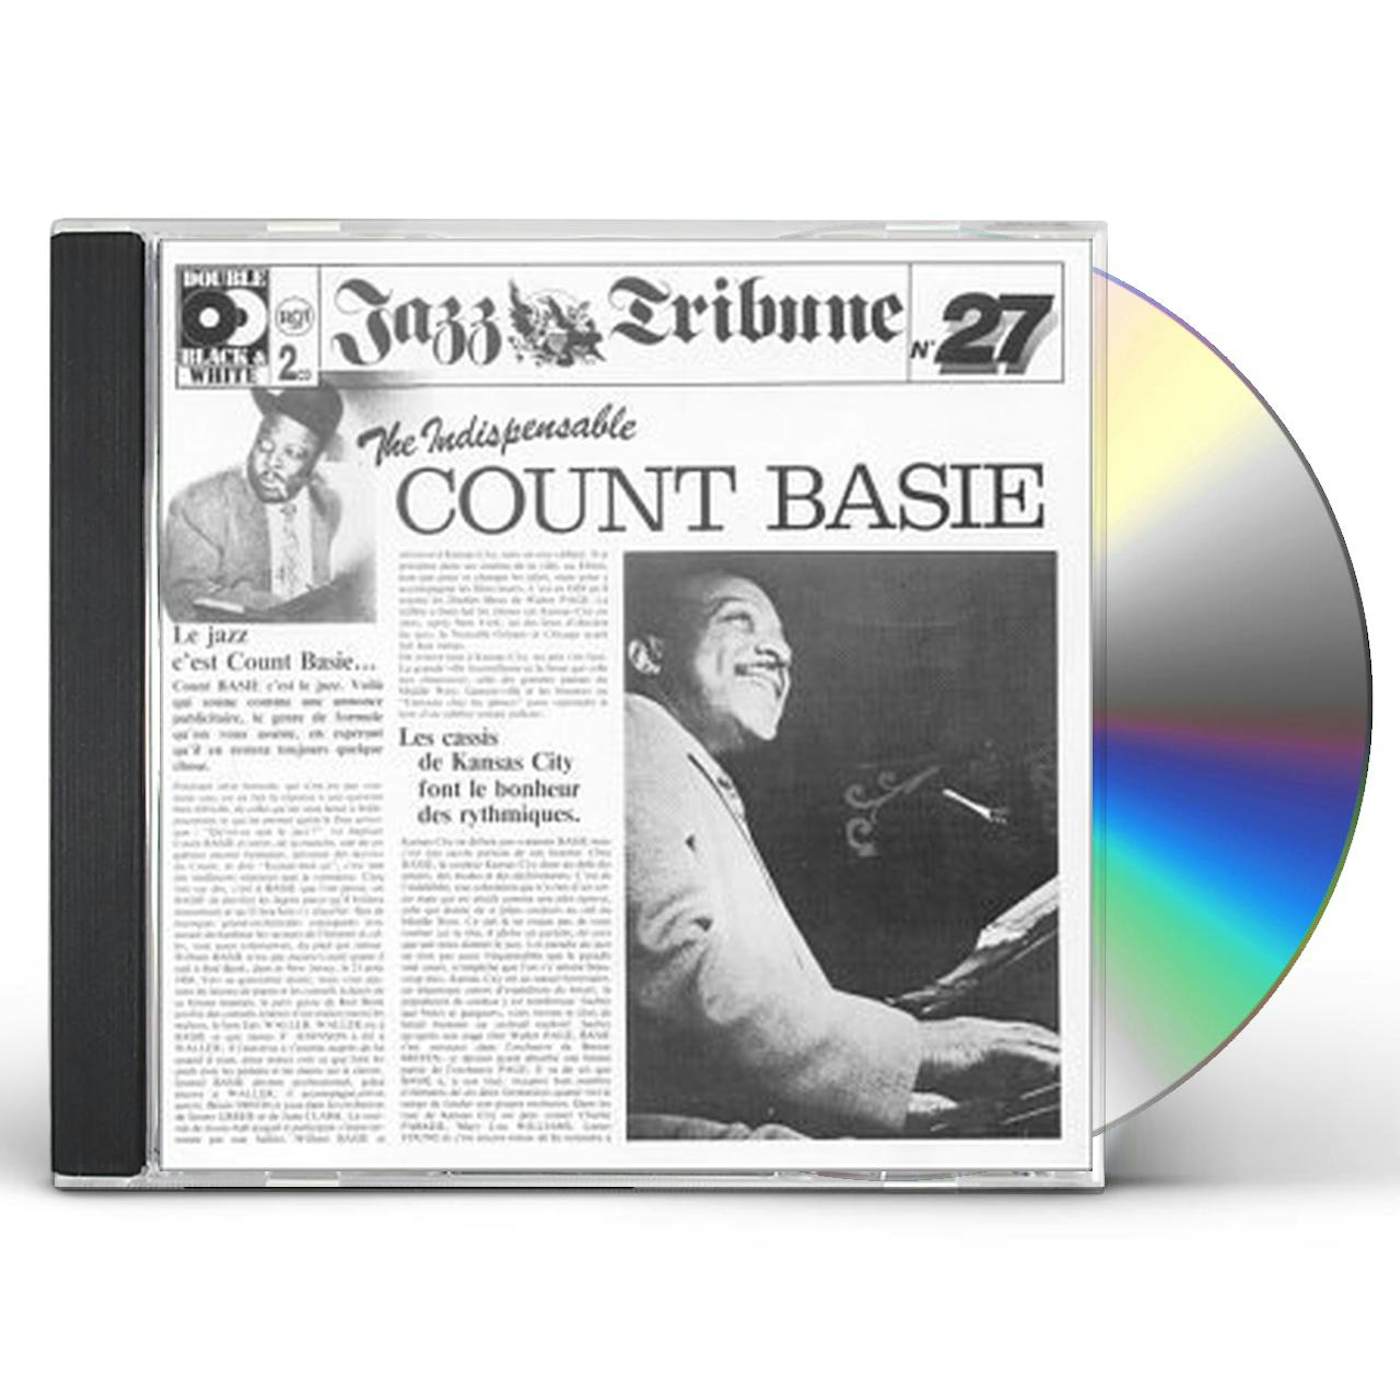 INDISPENSABLE COUNT BASIE CD